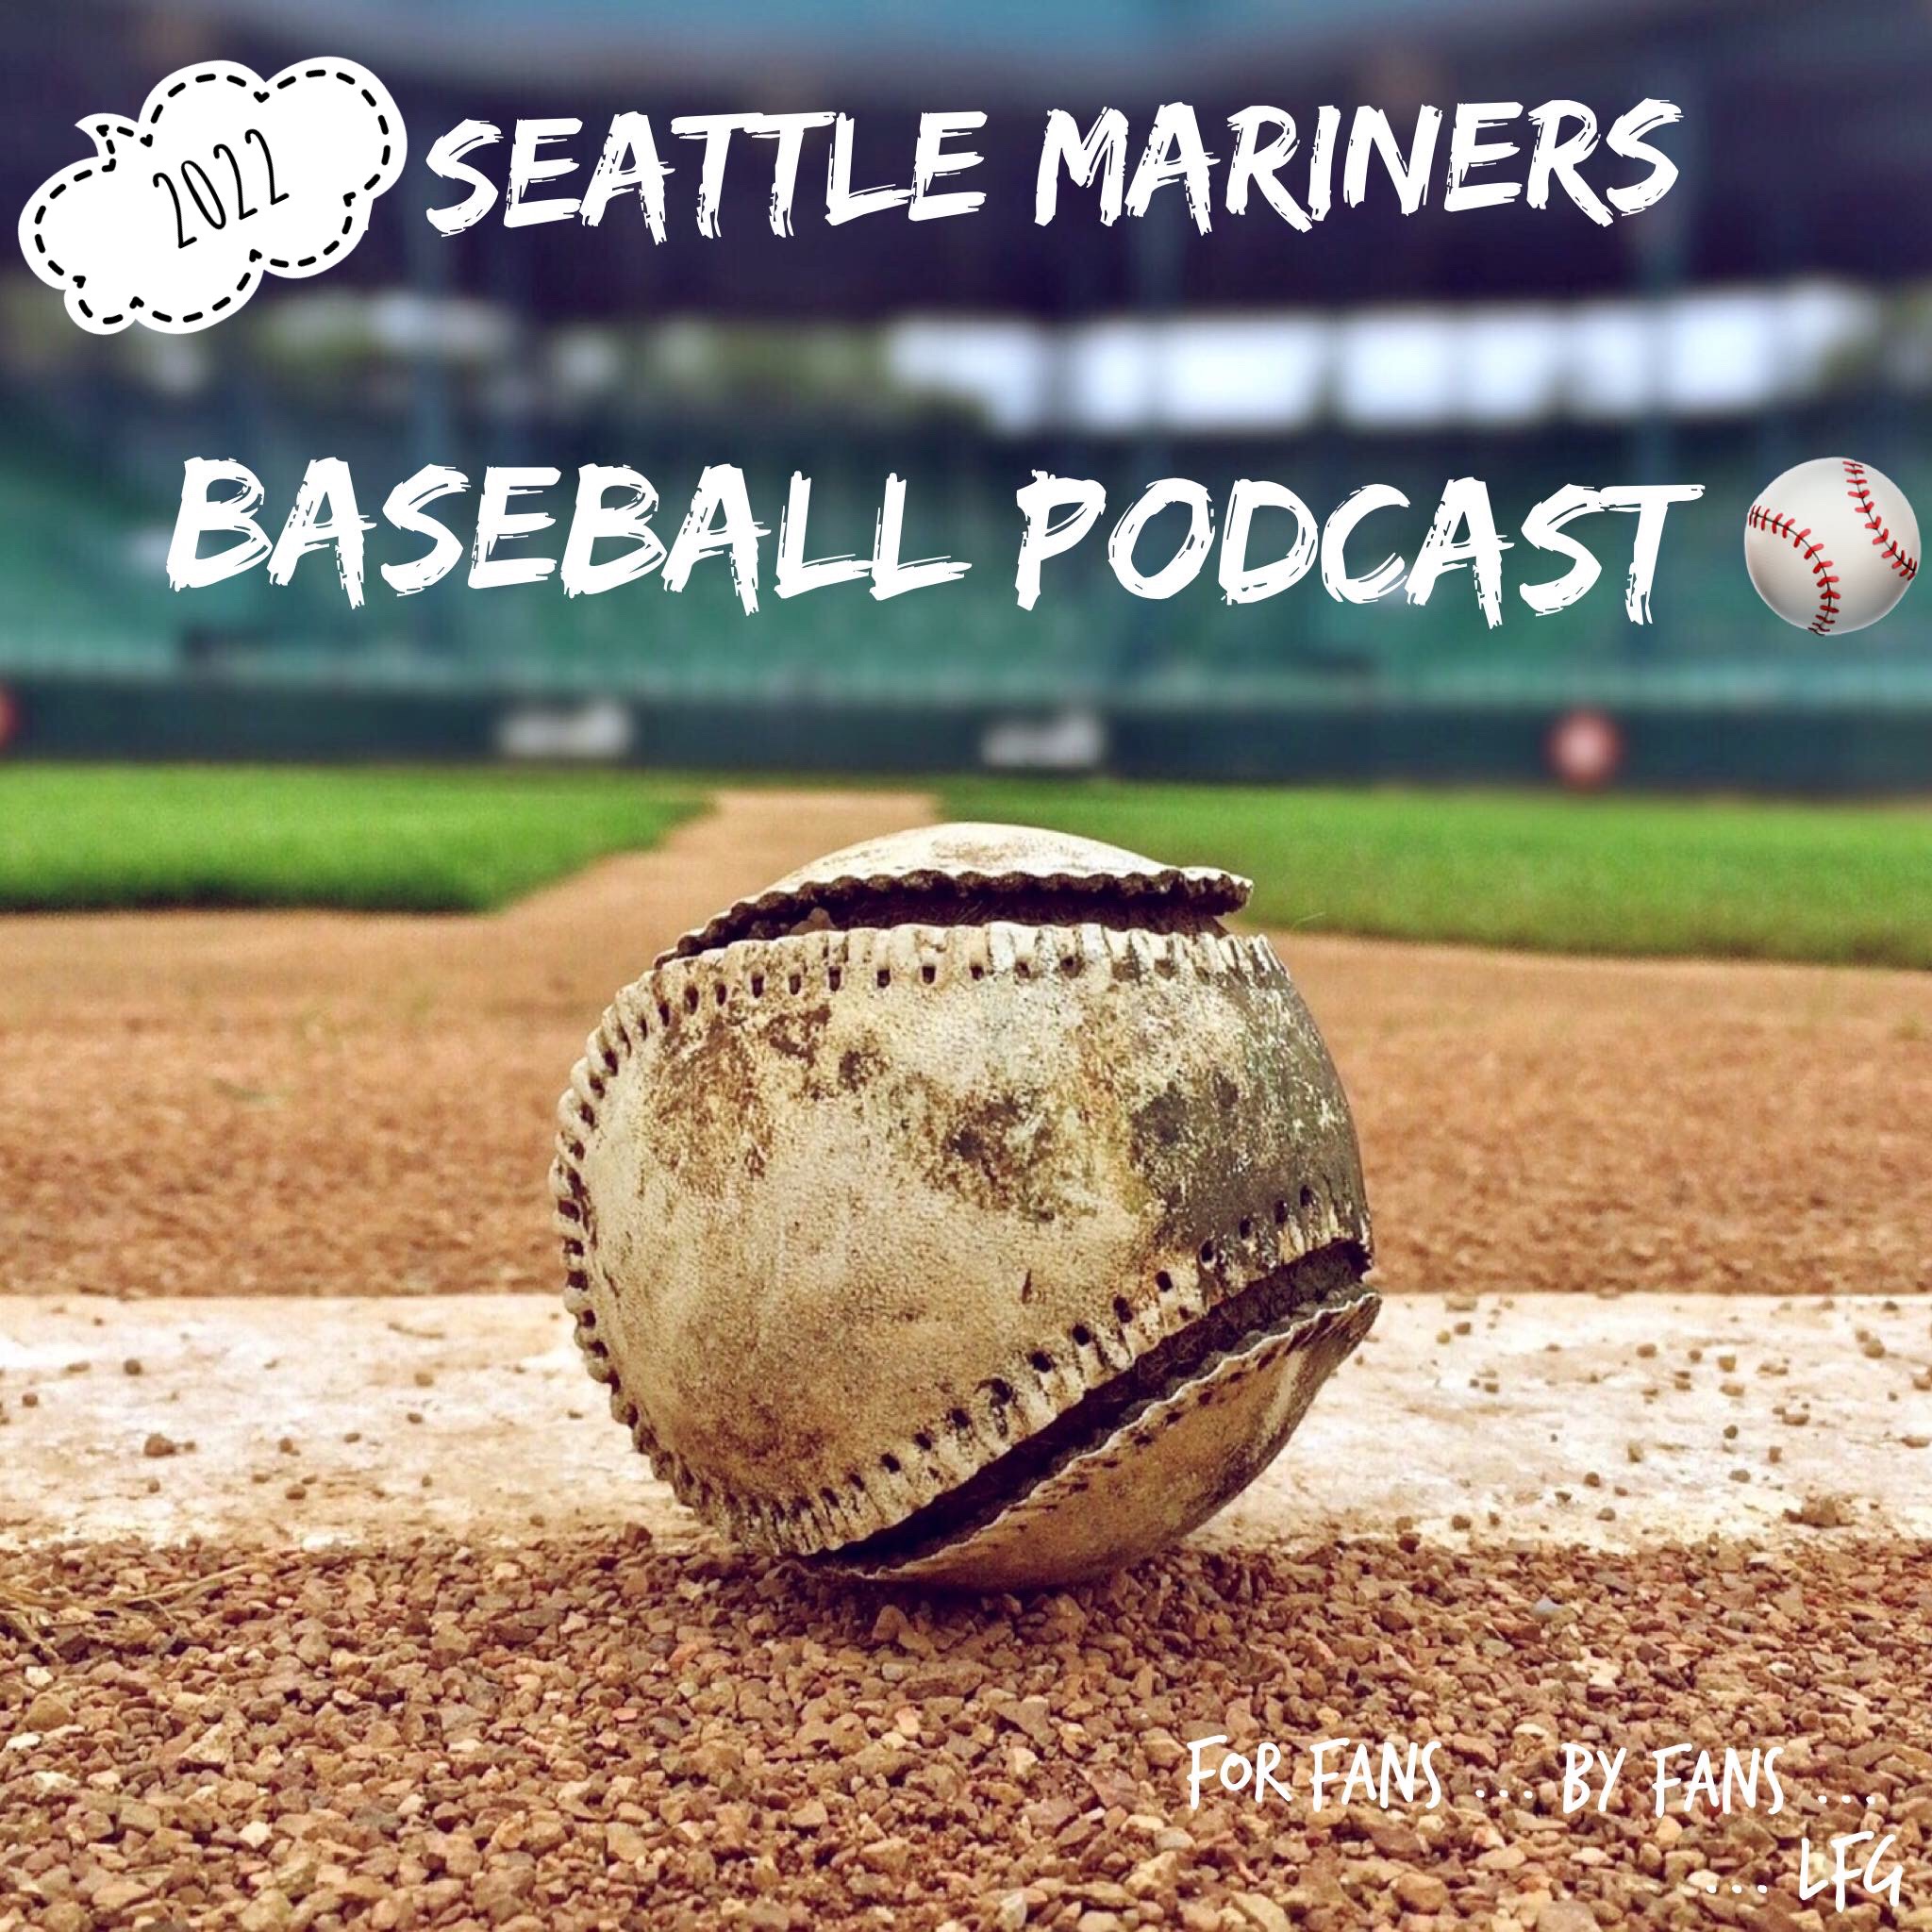 Artwork for podcast Seattle Mariners Baseball Podcast "Unofficial"